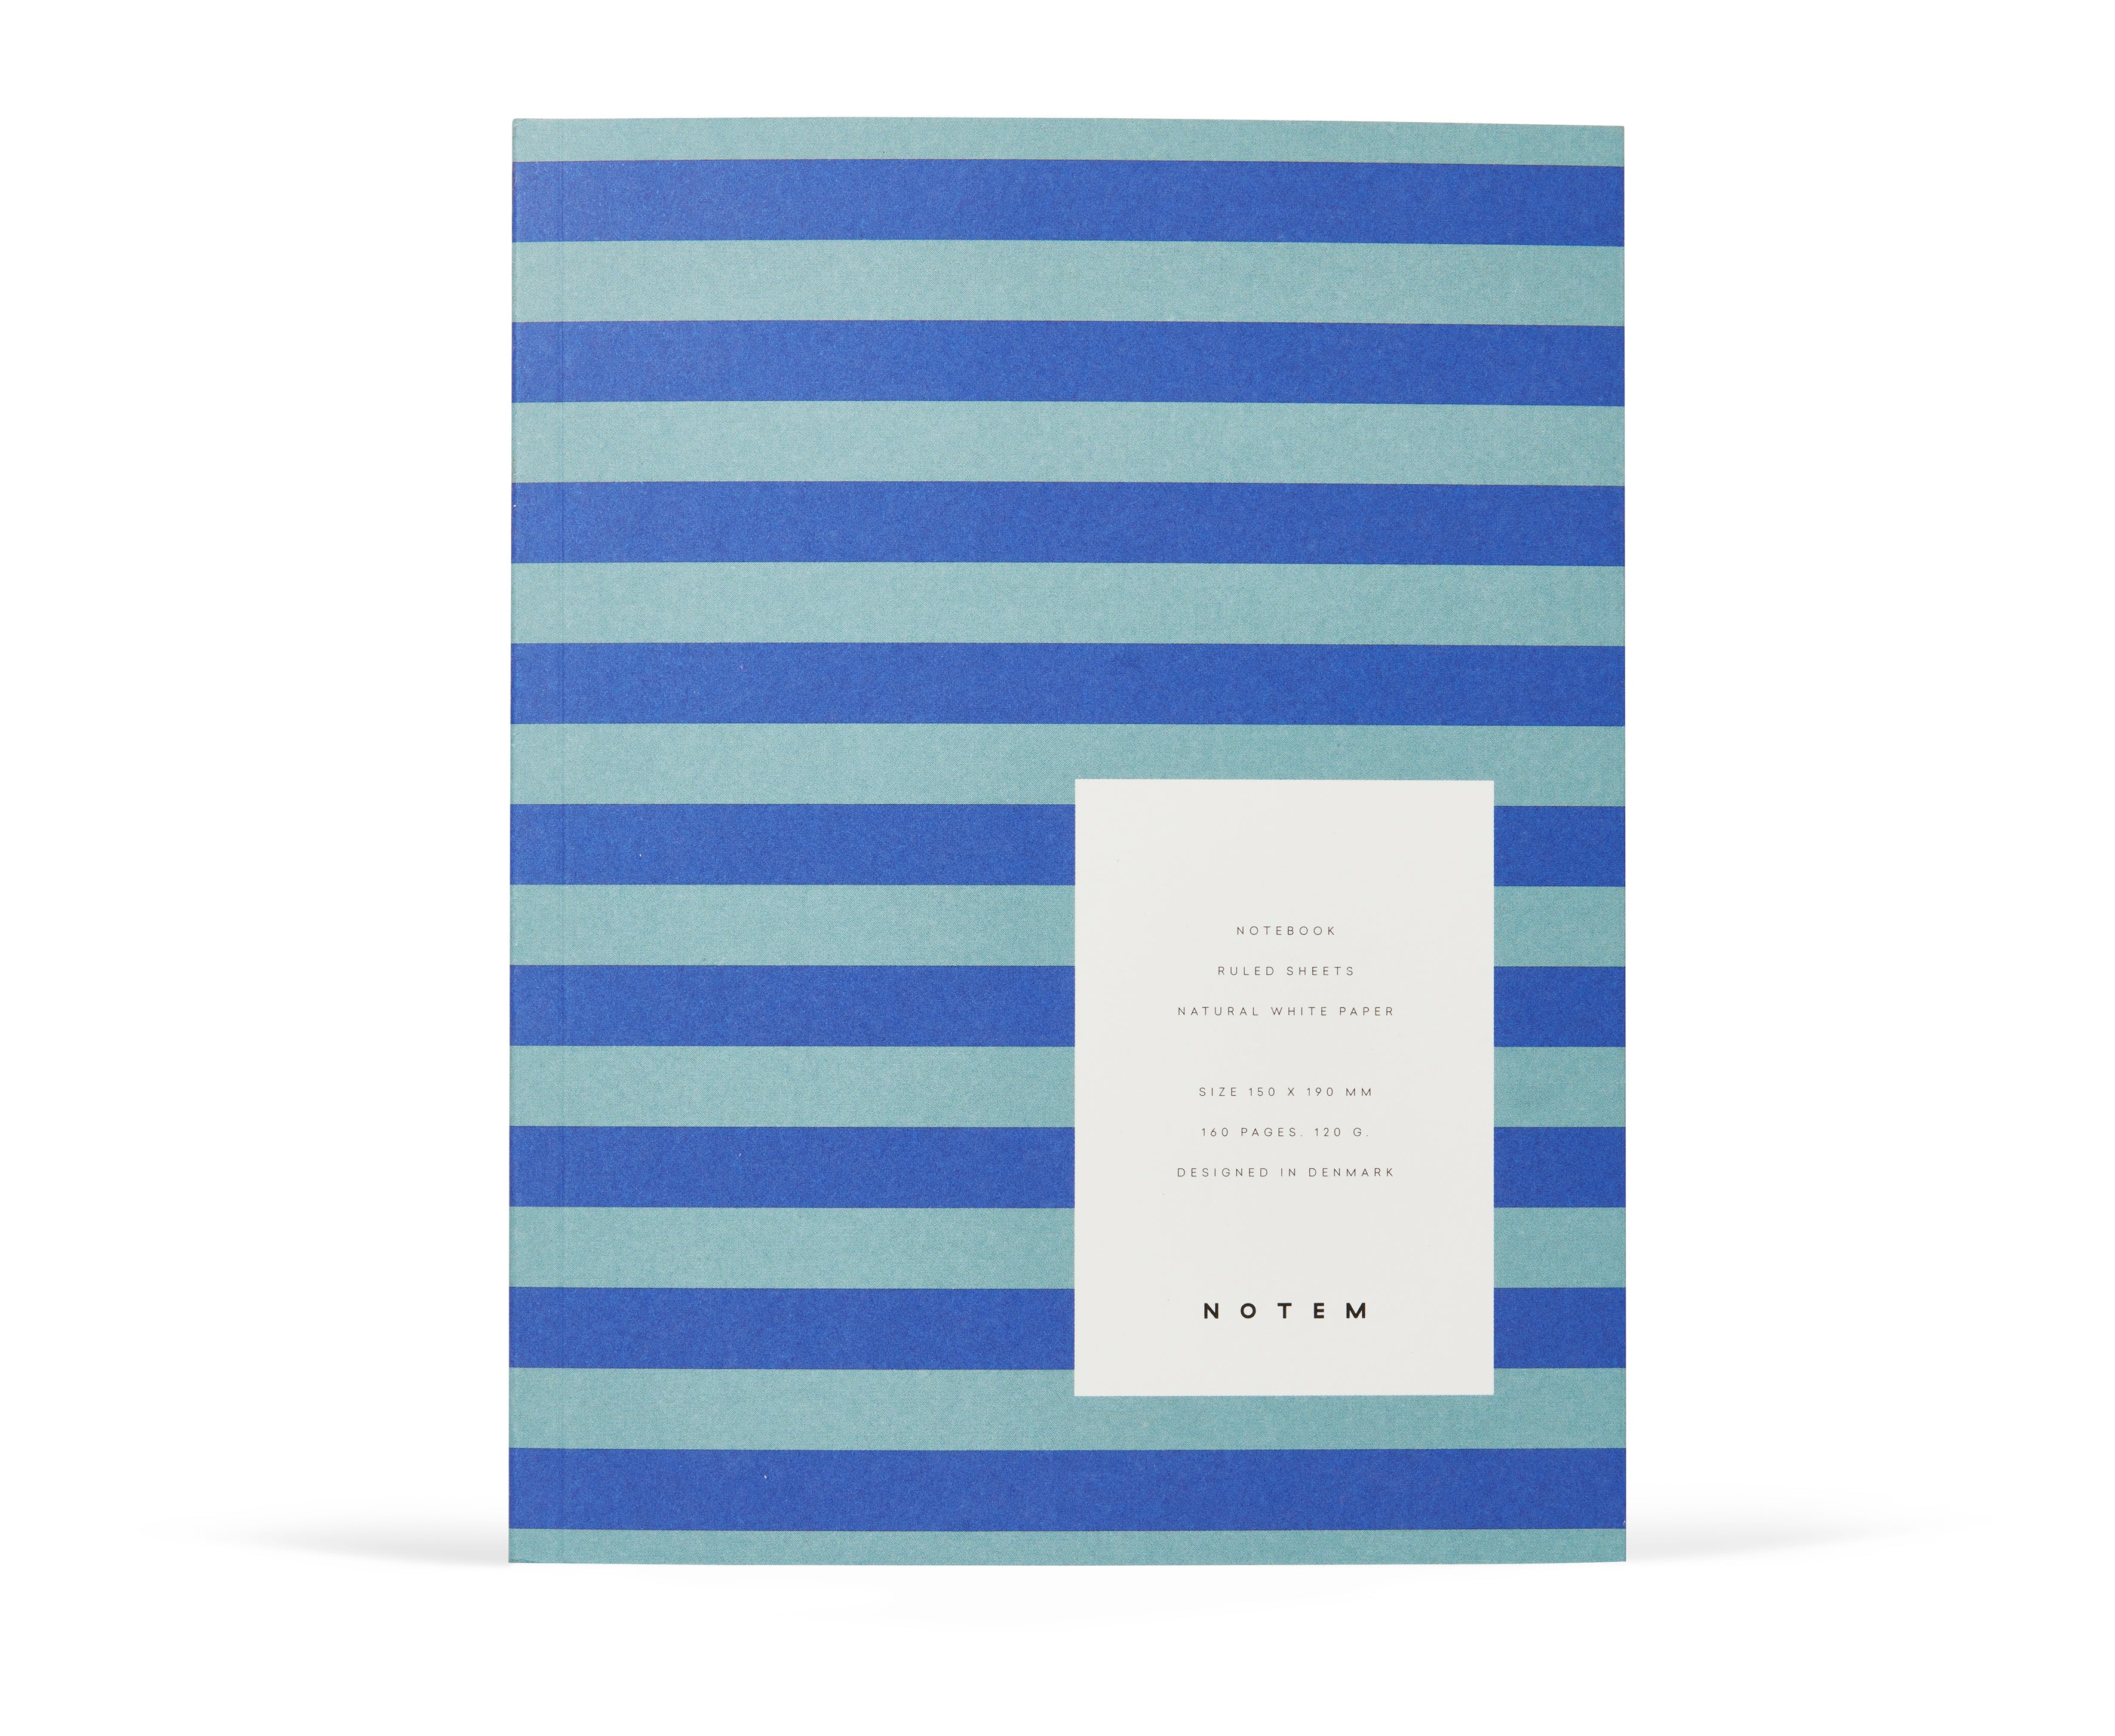 Shop for Home page at NOTEM studio: Flat Lay, Hardcover, Ruled, Softcover